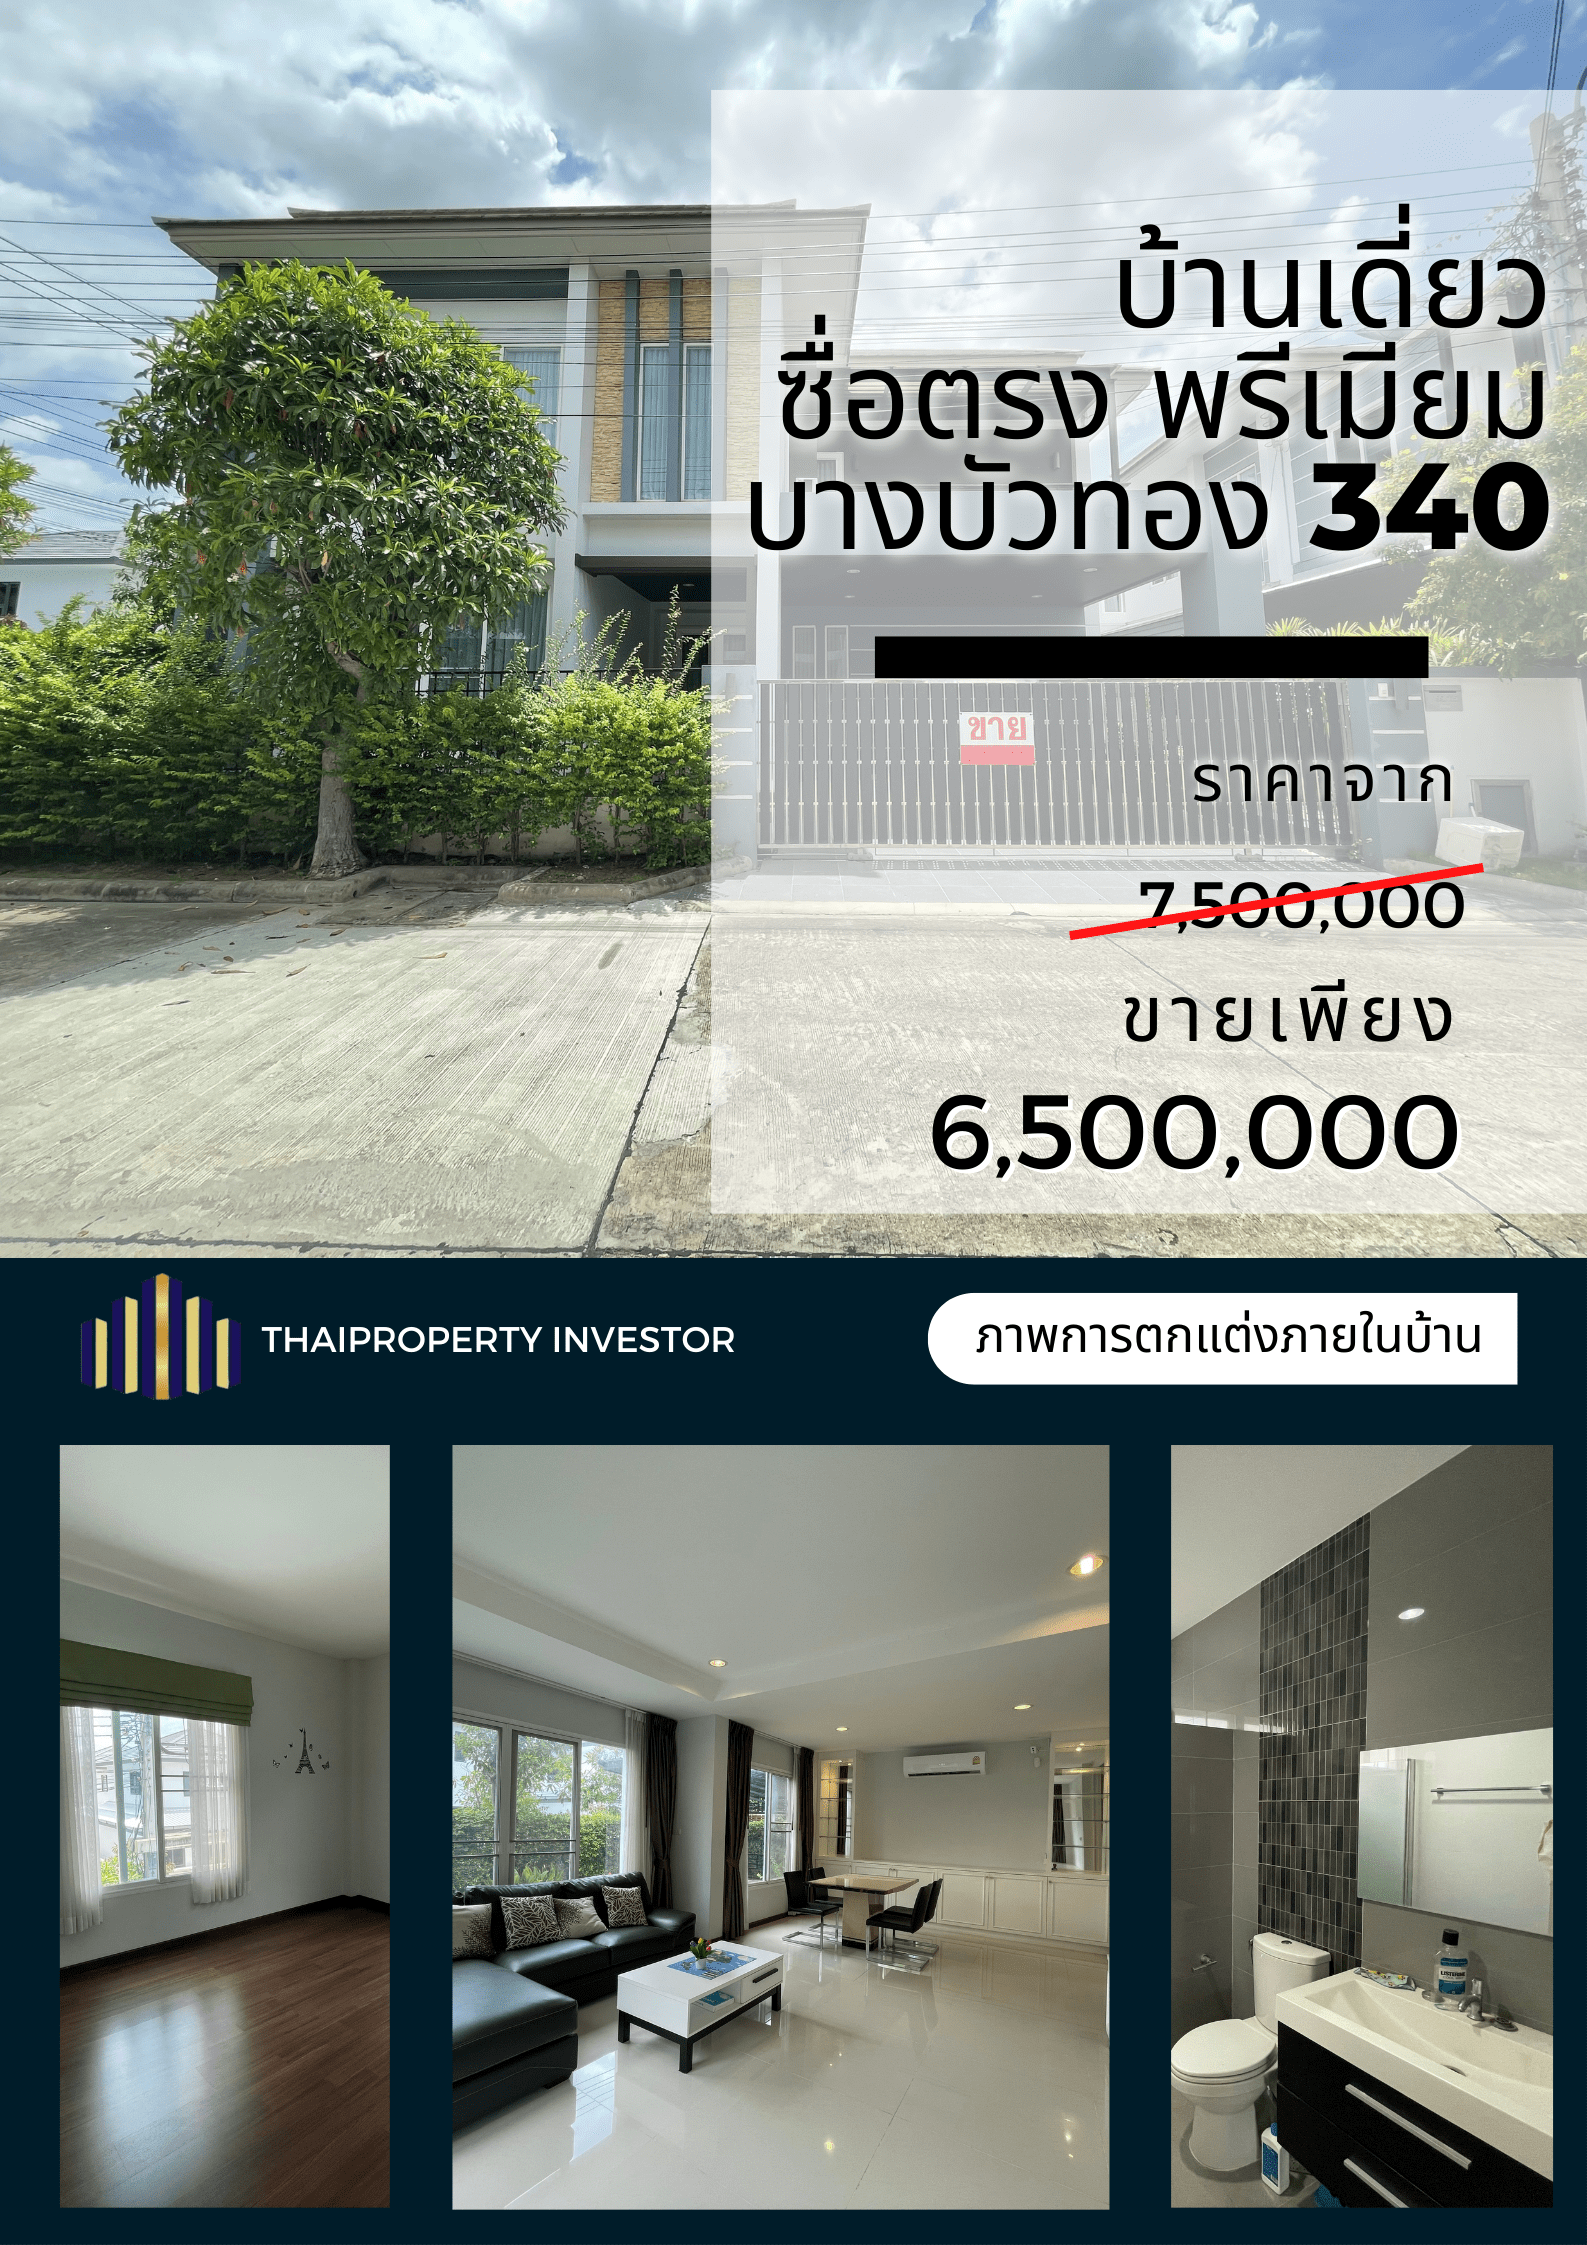 Selling at Cost Price!! Luxury House for Sale, Suetrong, Premium, Bang Bua Thong 340, corner house 74.9 sq.wa., 5 bedrooms, near Central Westgate and MRT Purple Line, Khlong Bang Phai.